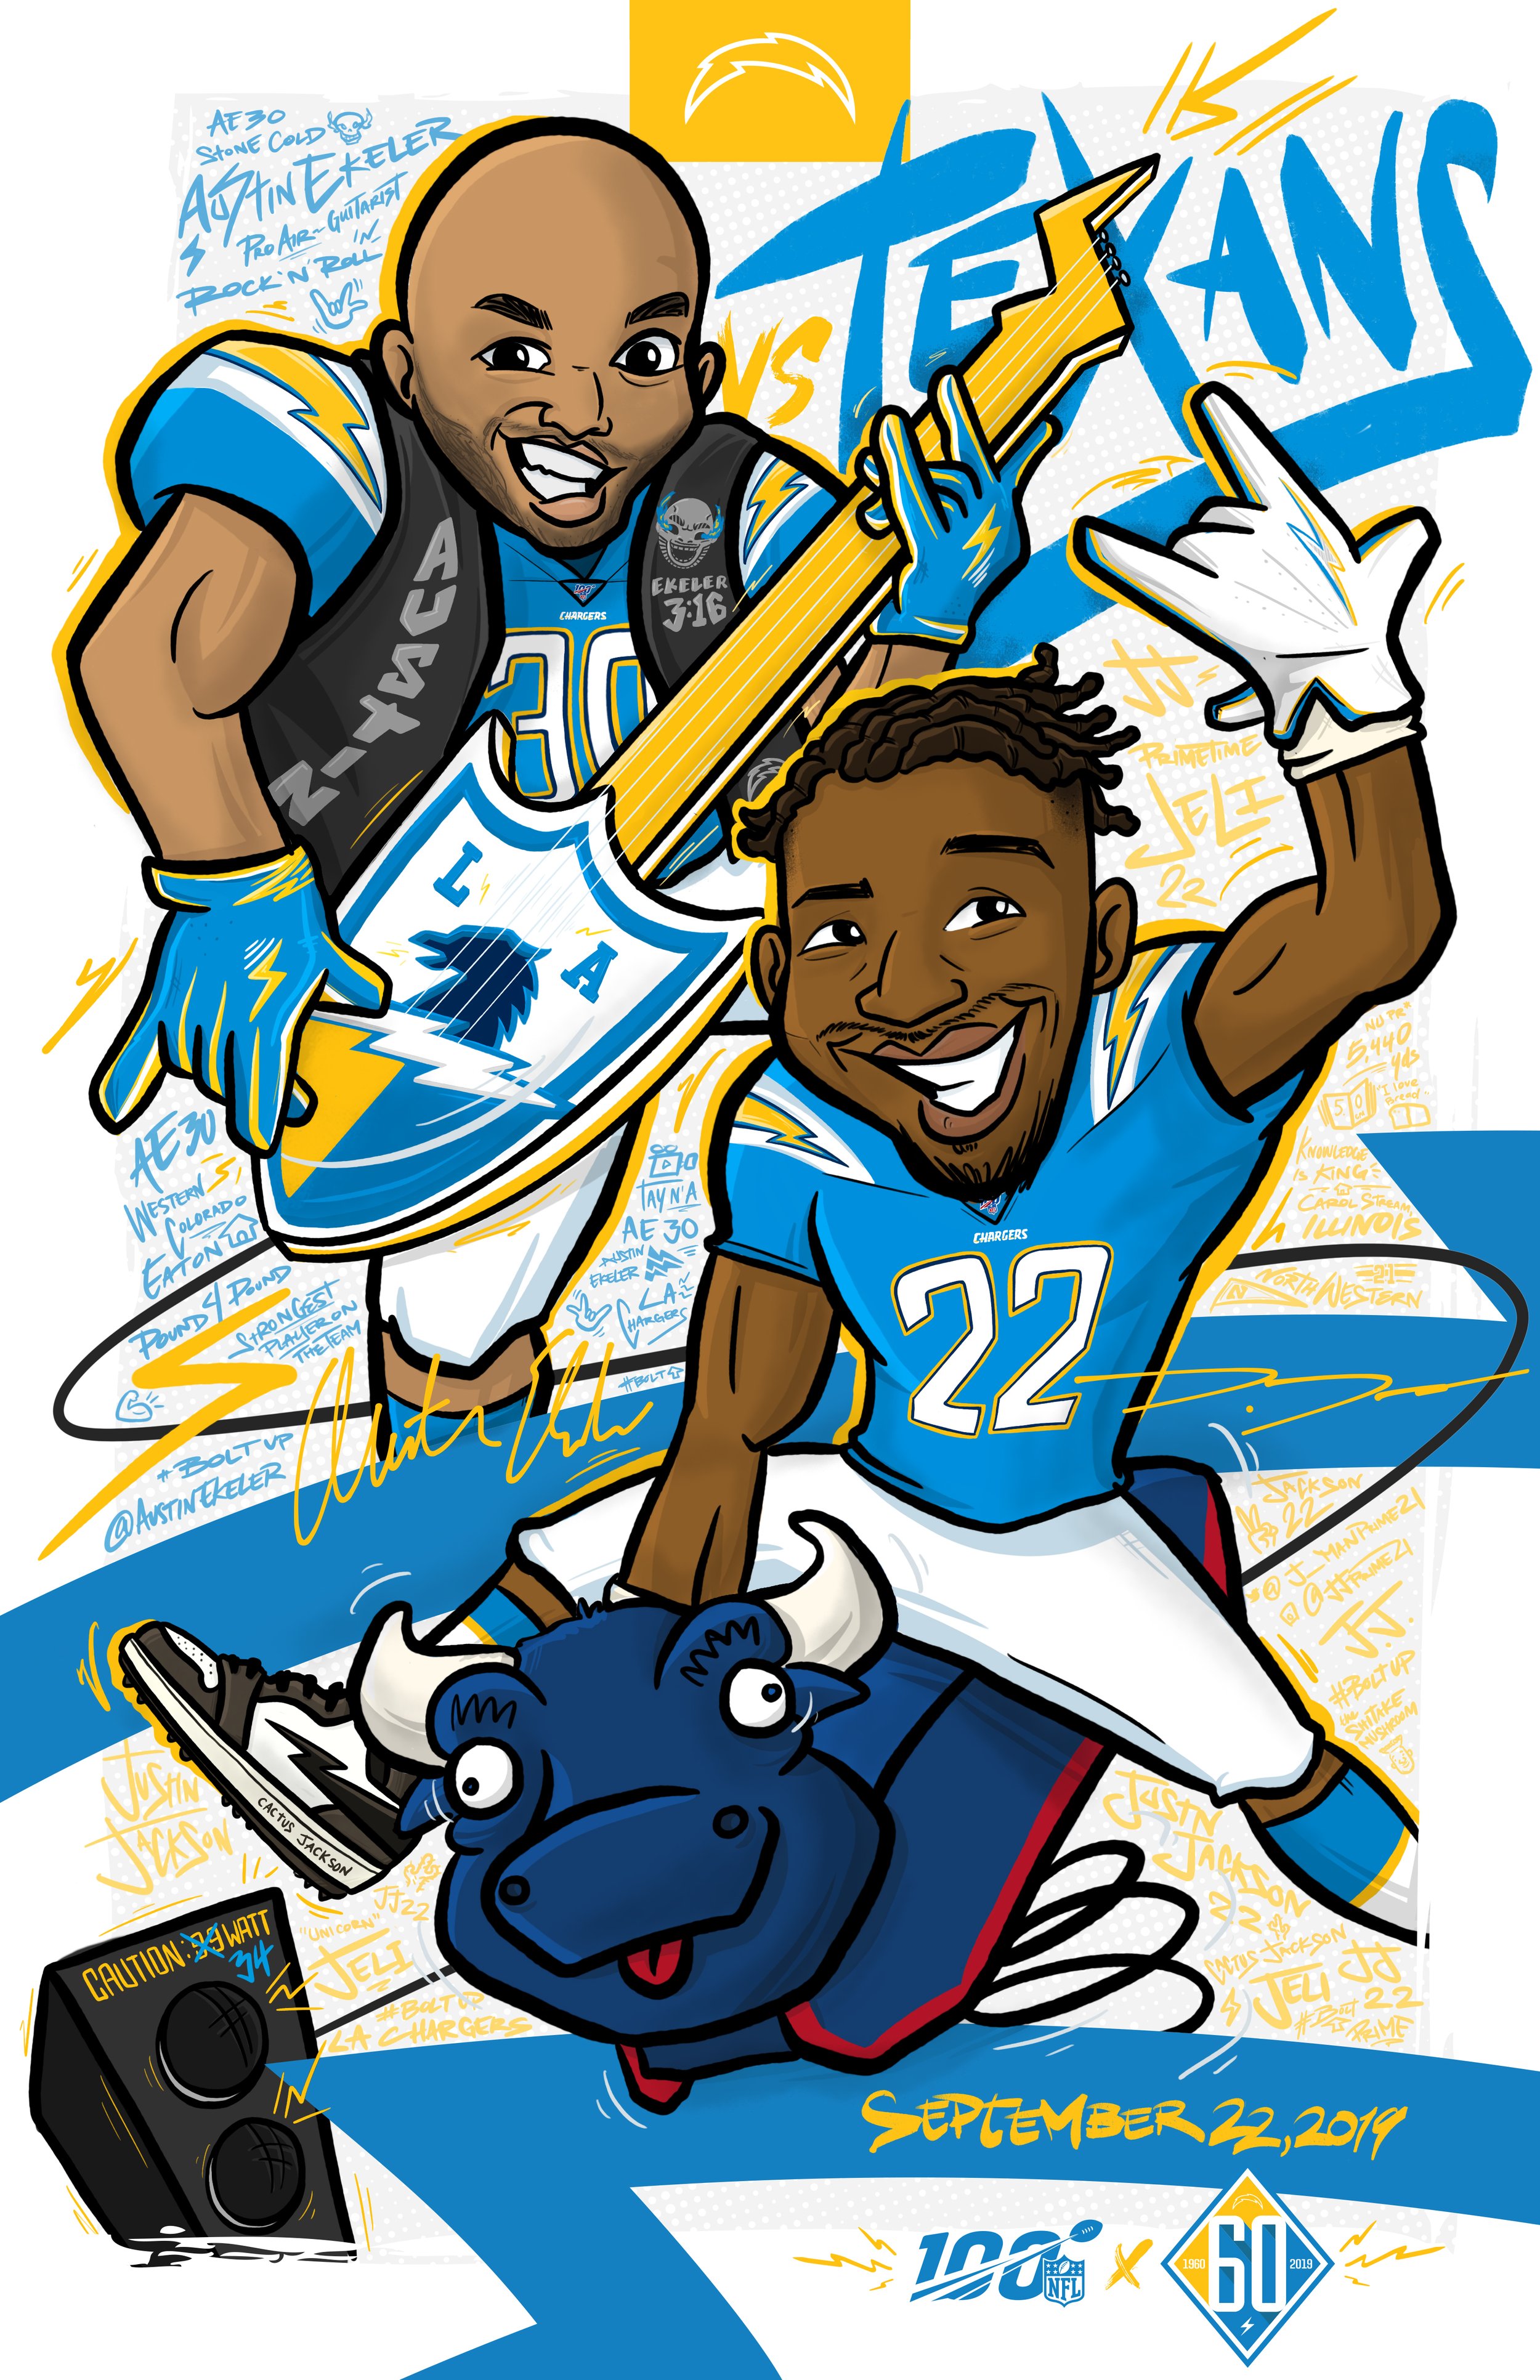 Gameday-Posters_full-Layout-02.jpg